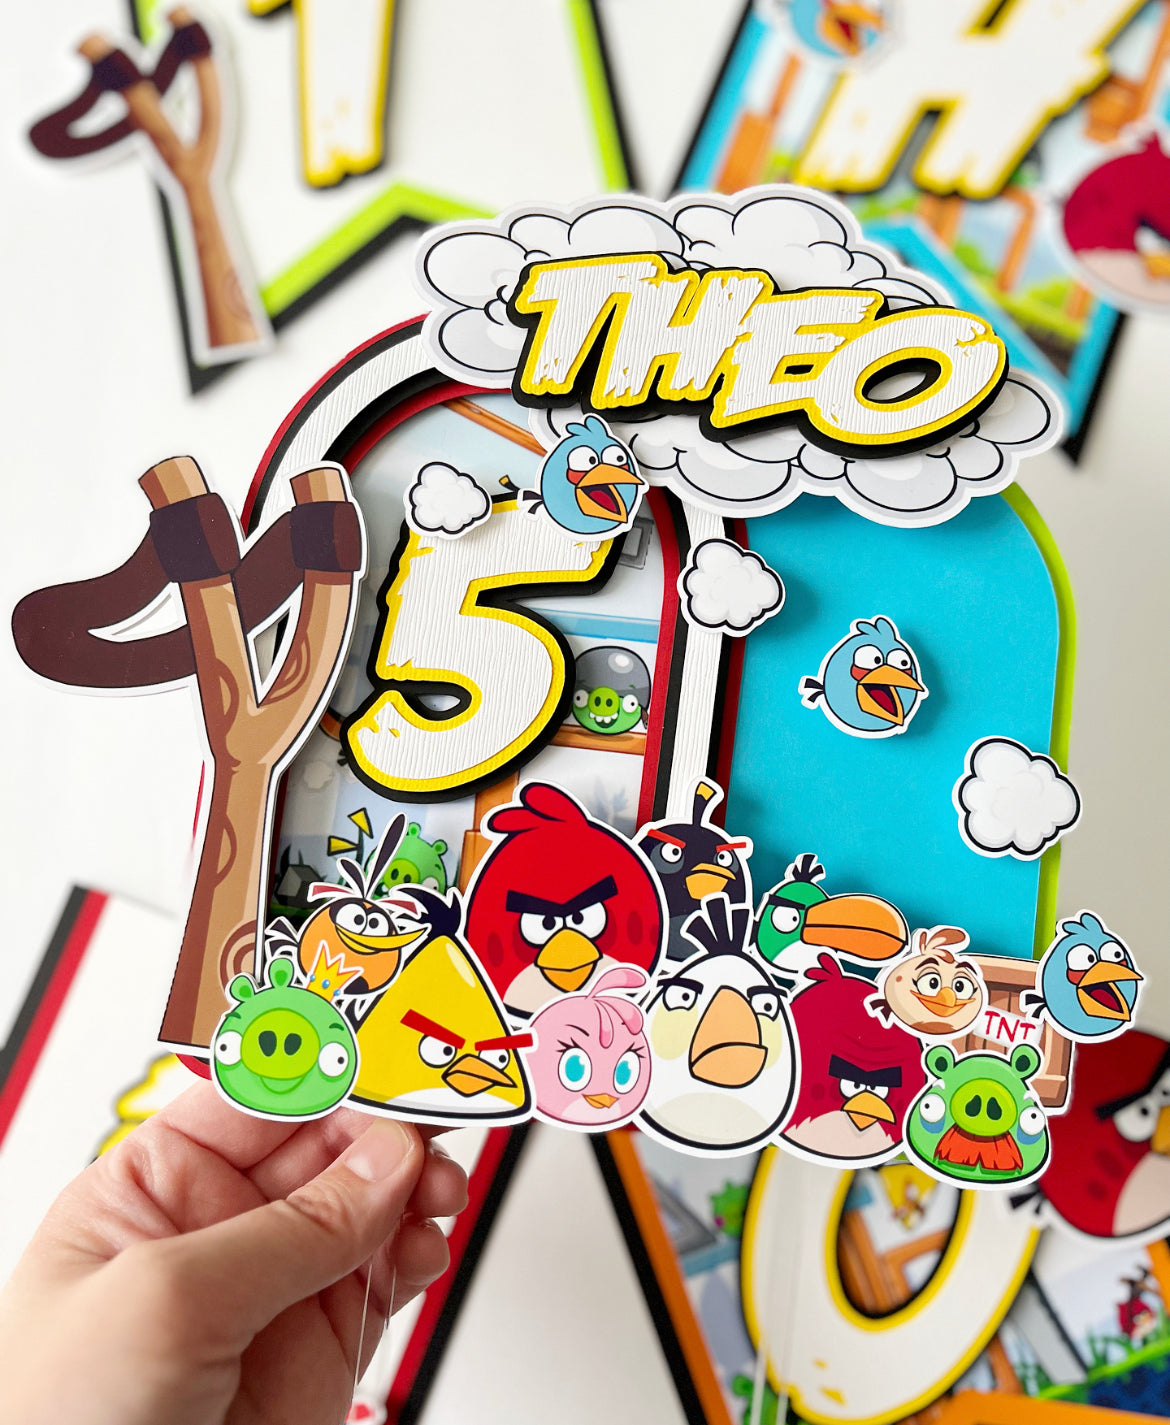 Angry Birds themed Party Decorations